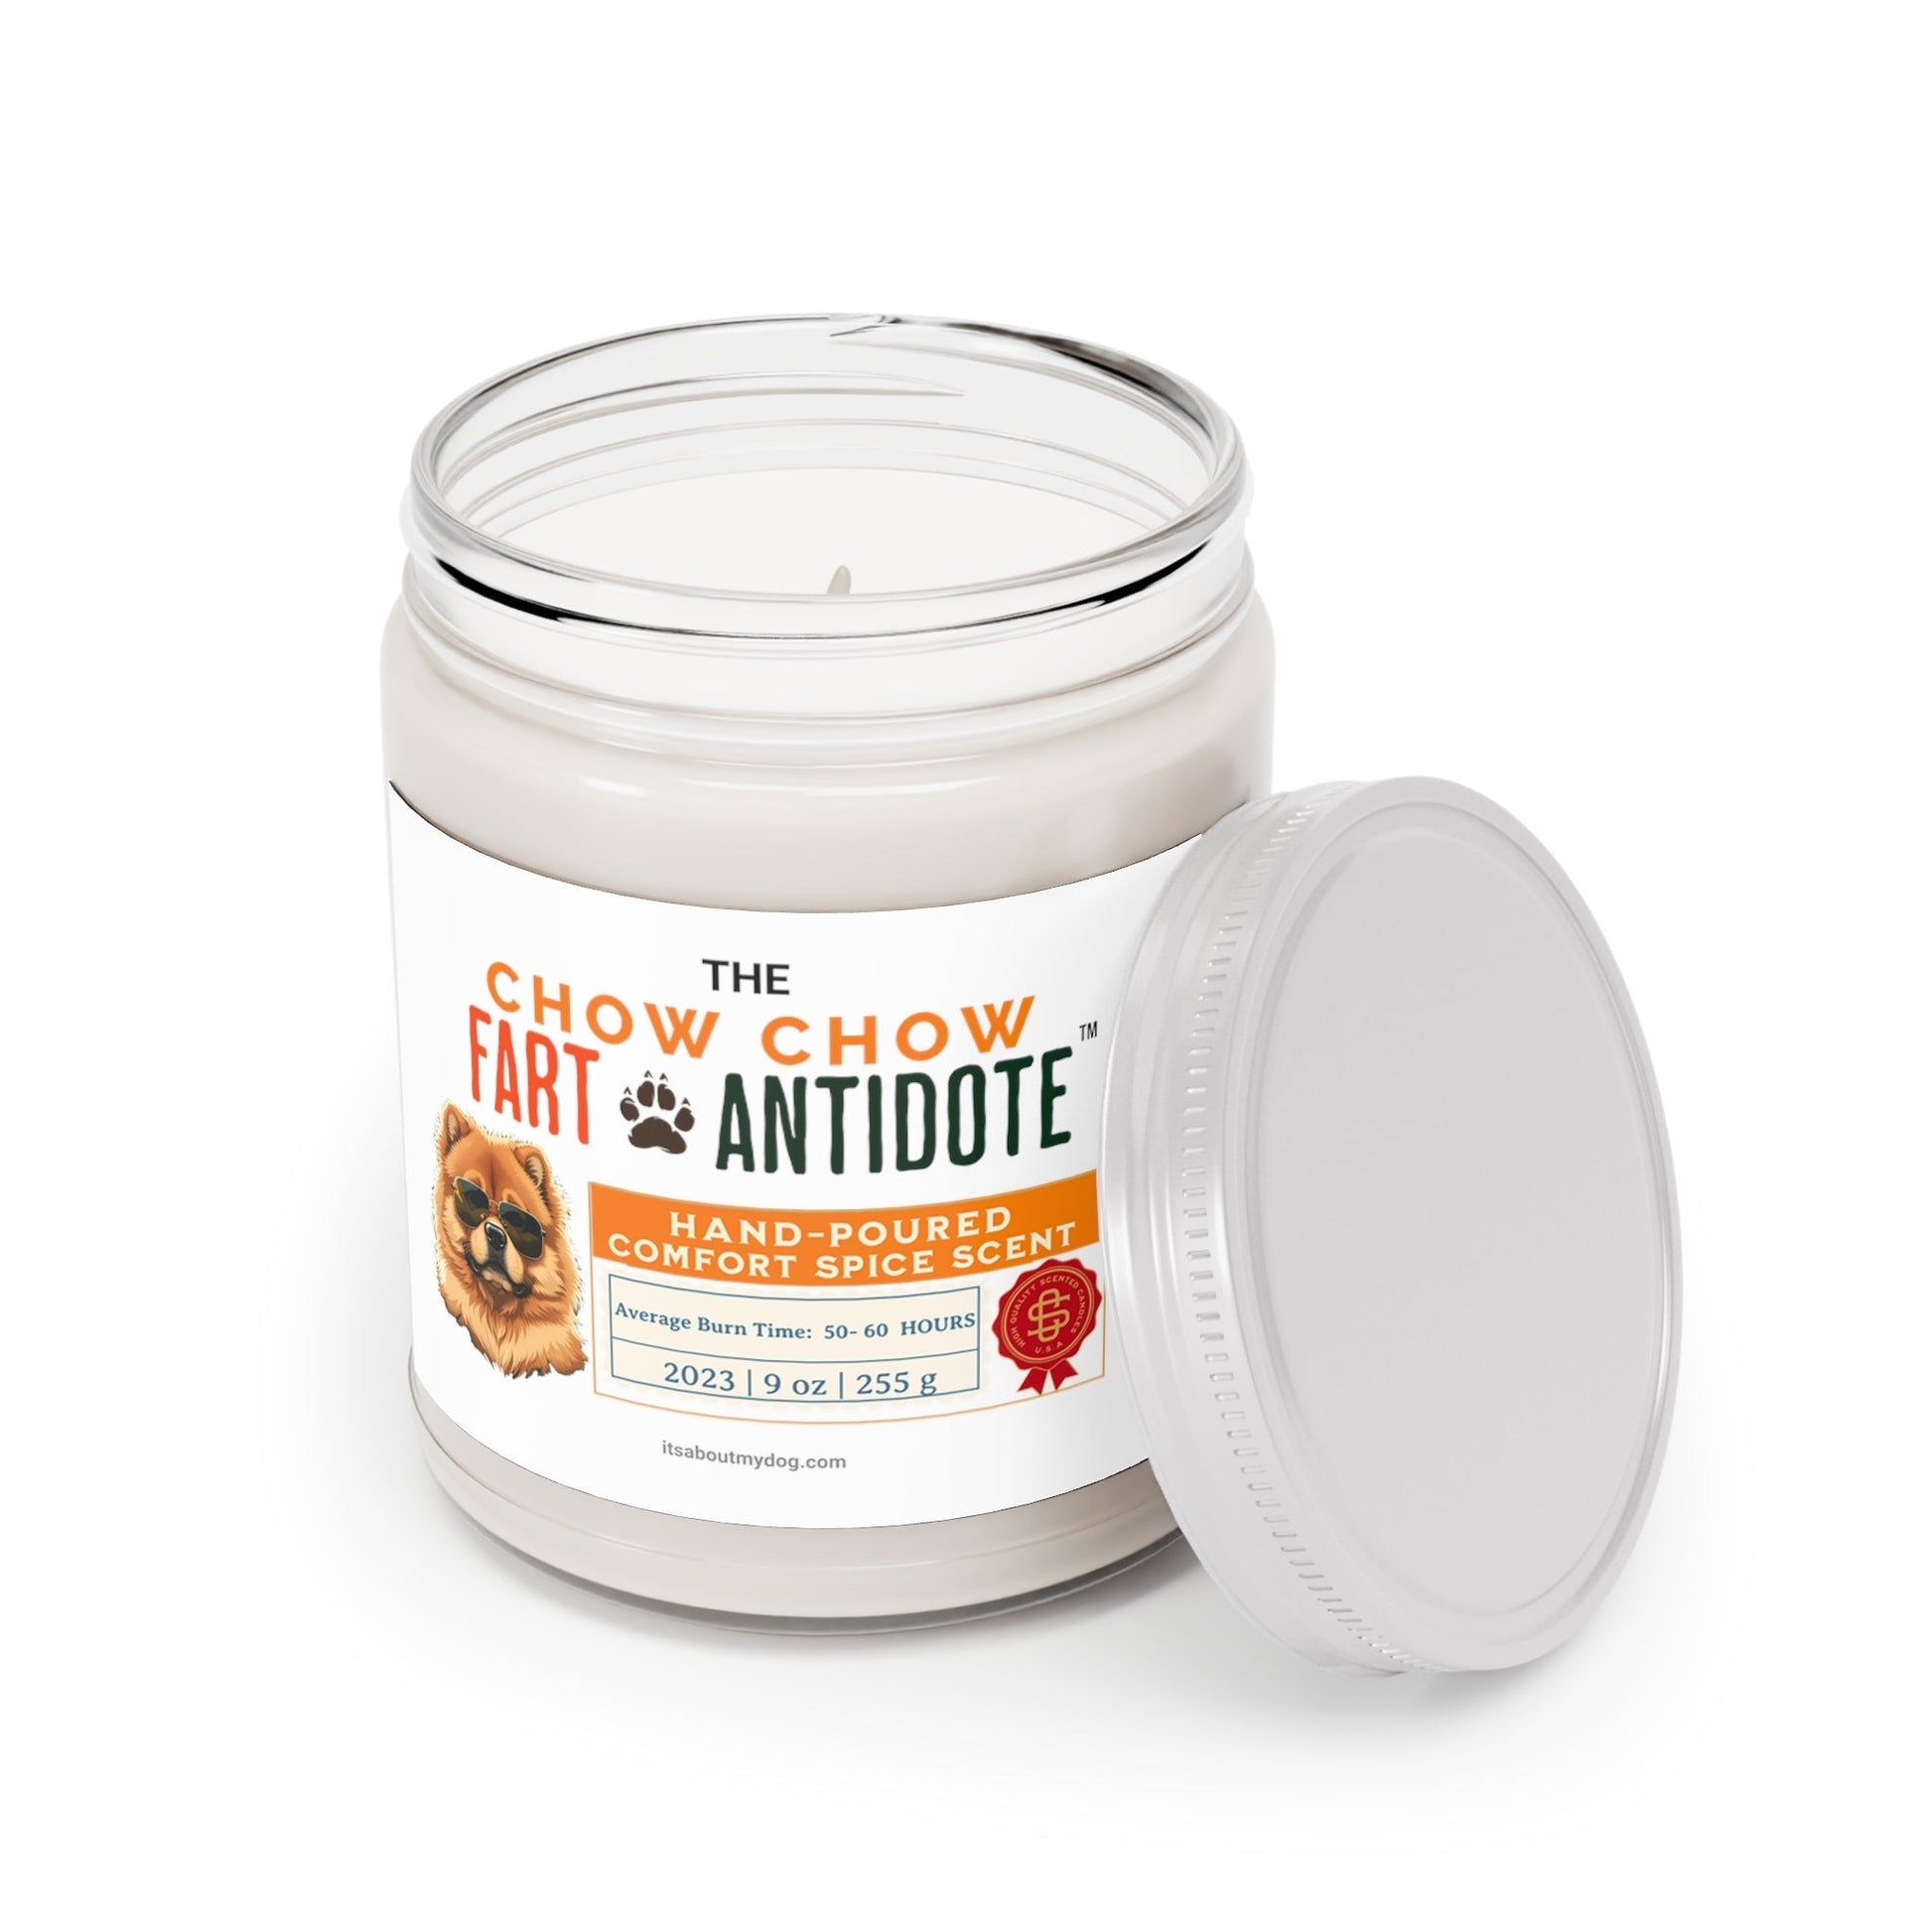 Chow Chow Dog Fart Antidote-9oz Scented Candle, Chow Chow Gifts27.99-(FREE Delivery) Shop now at itsaboutmydog.com, chow chow for sale, chow chow gifts, dog fart candle, light me when the dog farts candle, sorry my dog farted candle